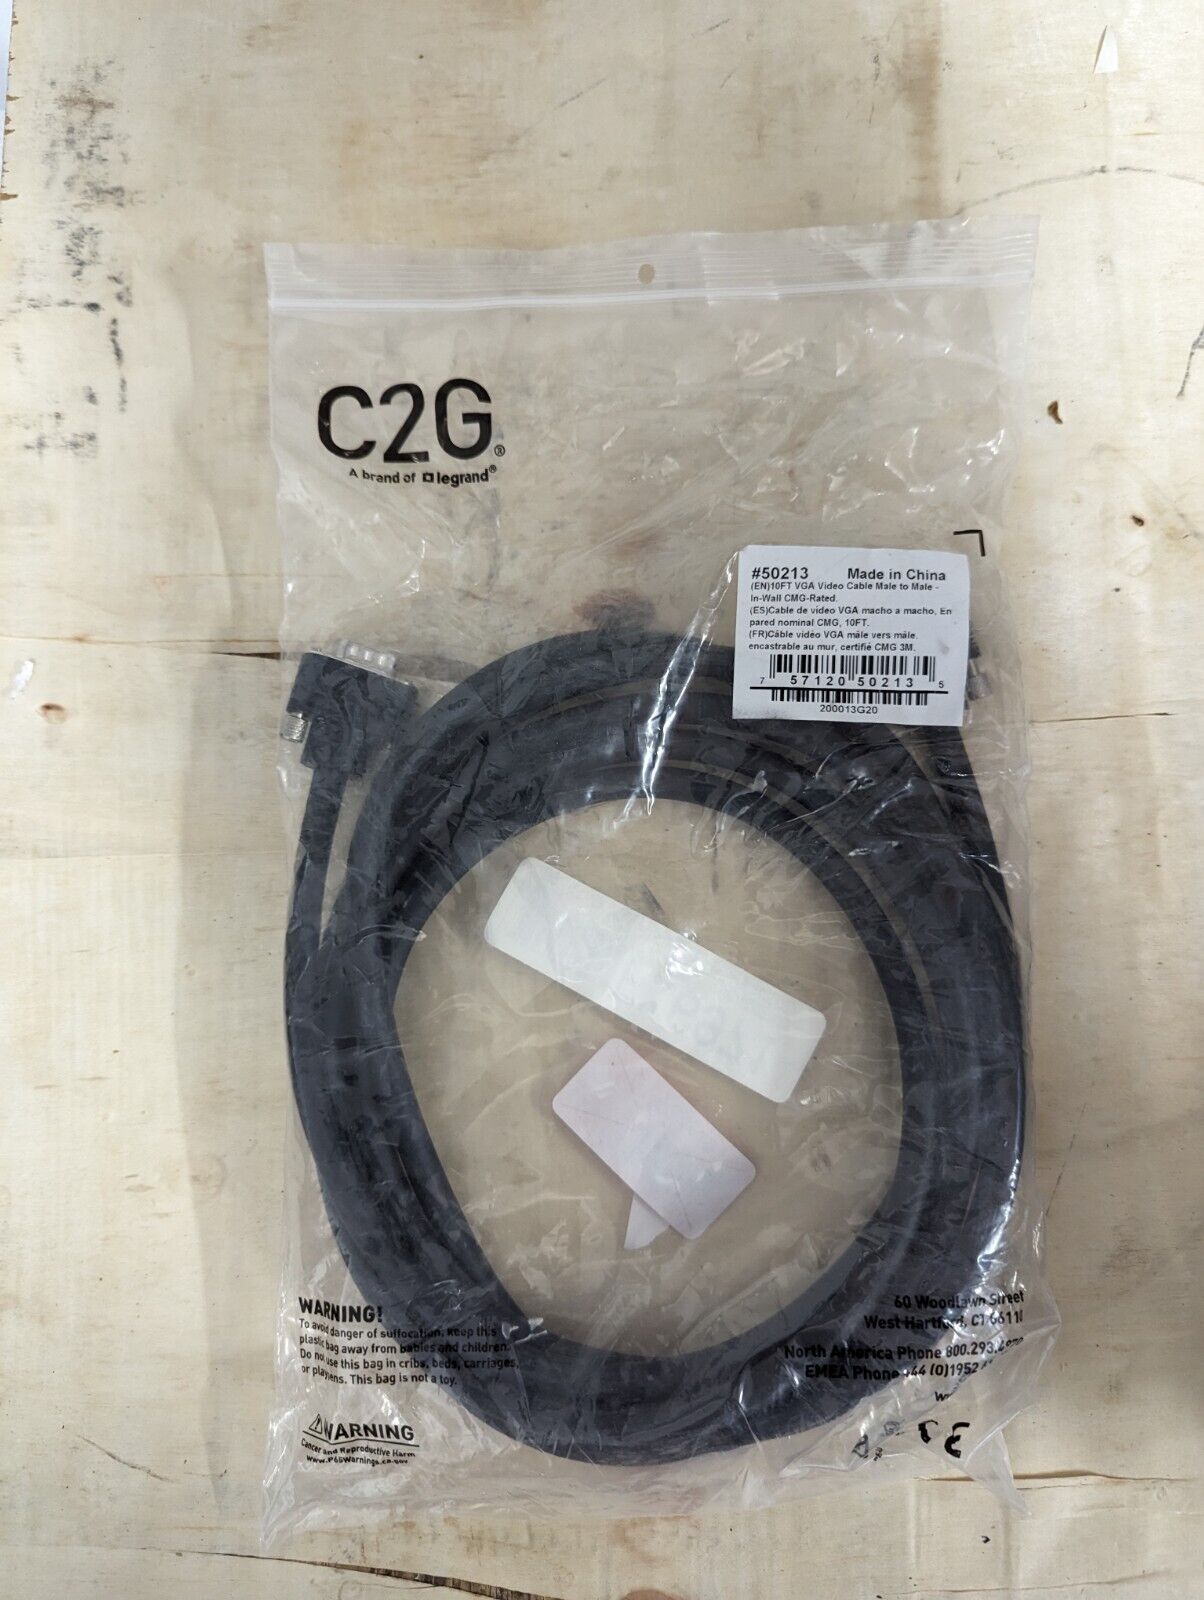 NEW C2G Legrand In-Wall VGA Cable, 10 Foot VGA Video Cable, Male to Male 10 FT